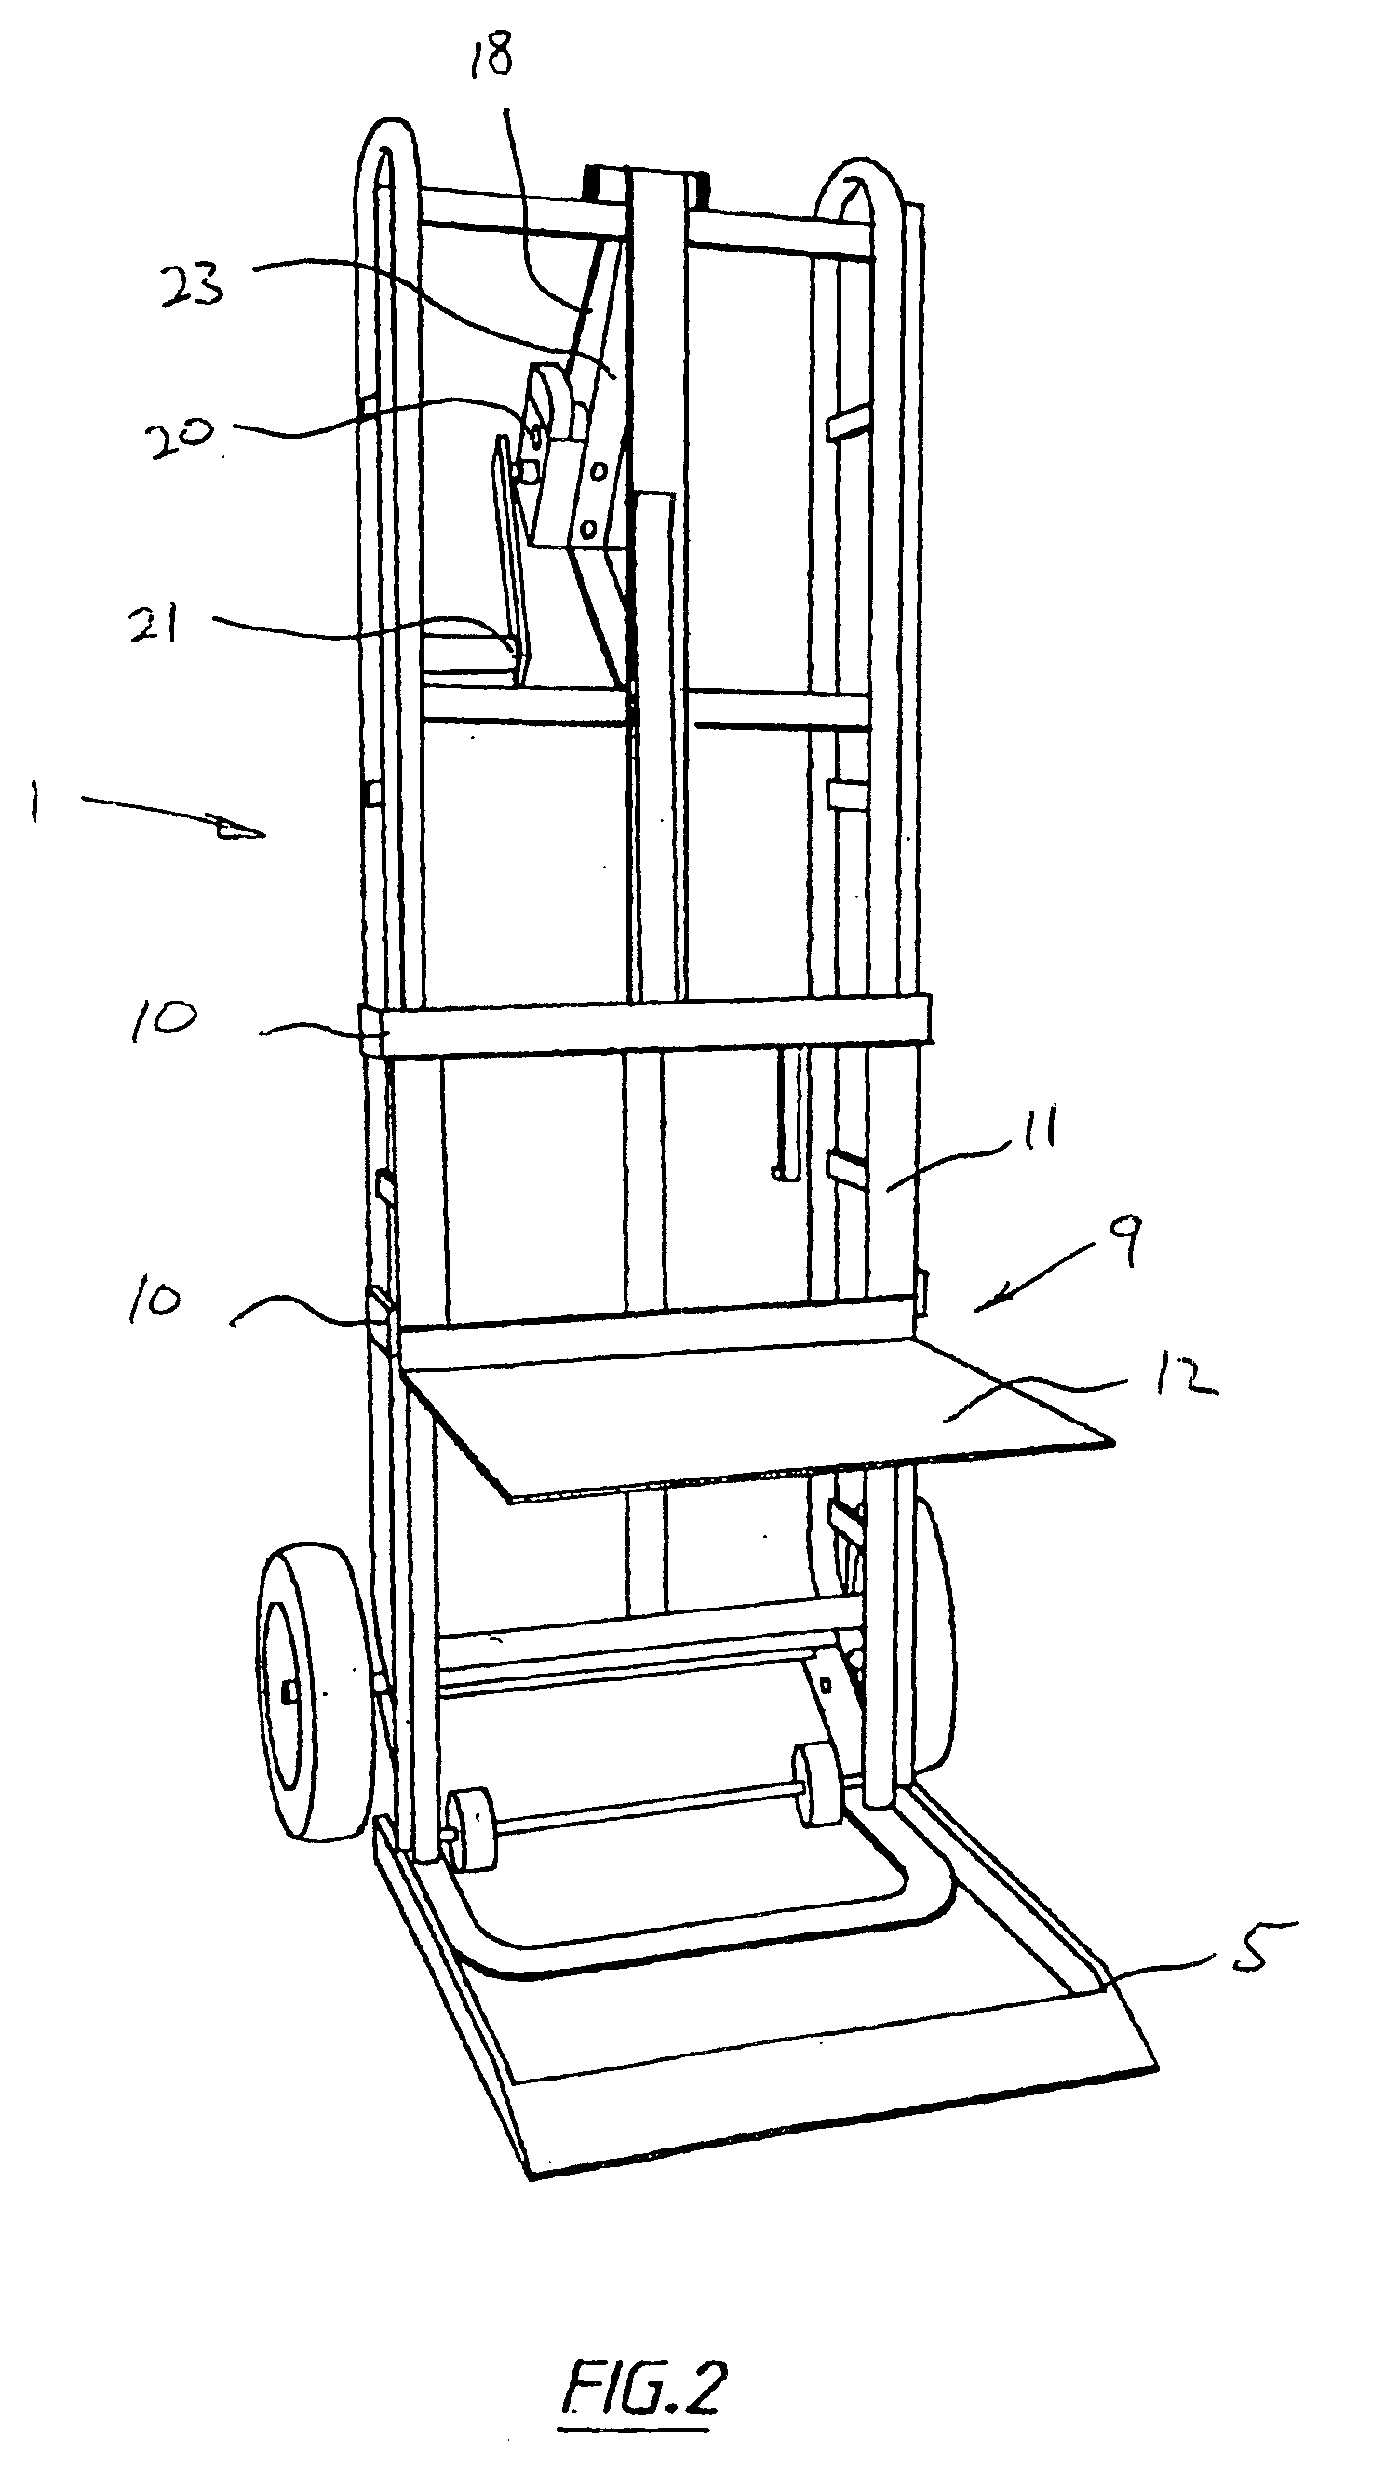 Hand trolley with winch operated lifting carriage